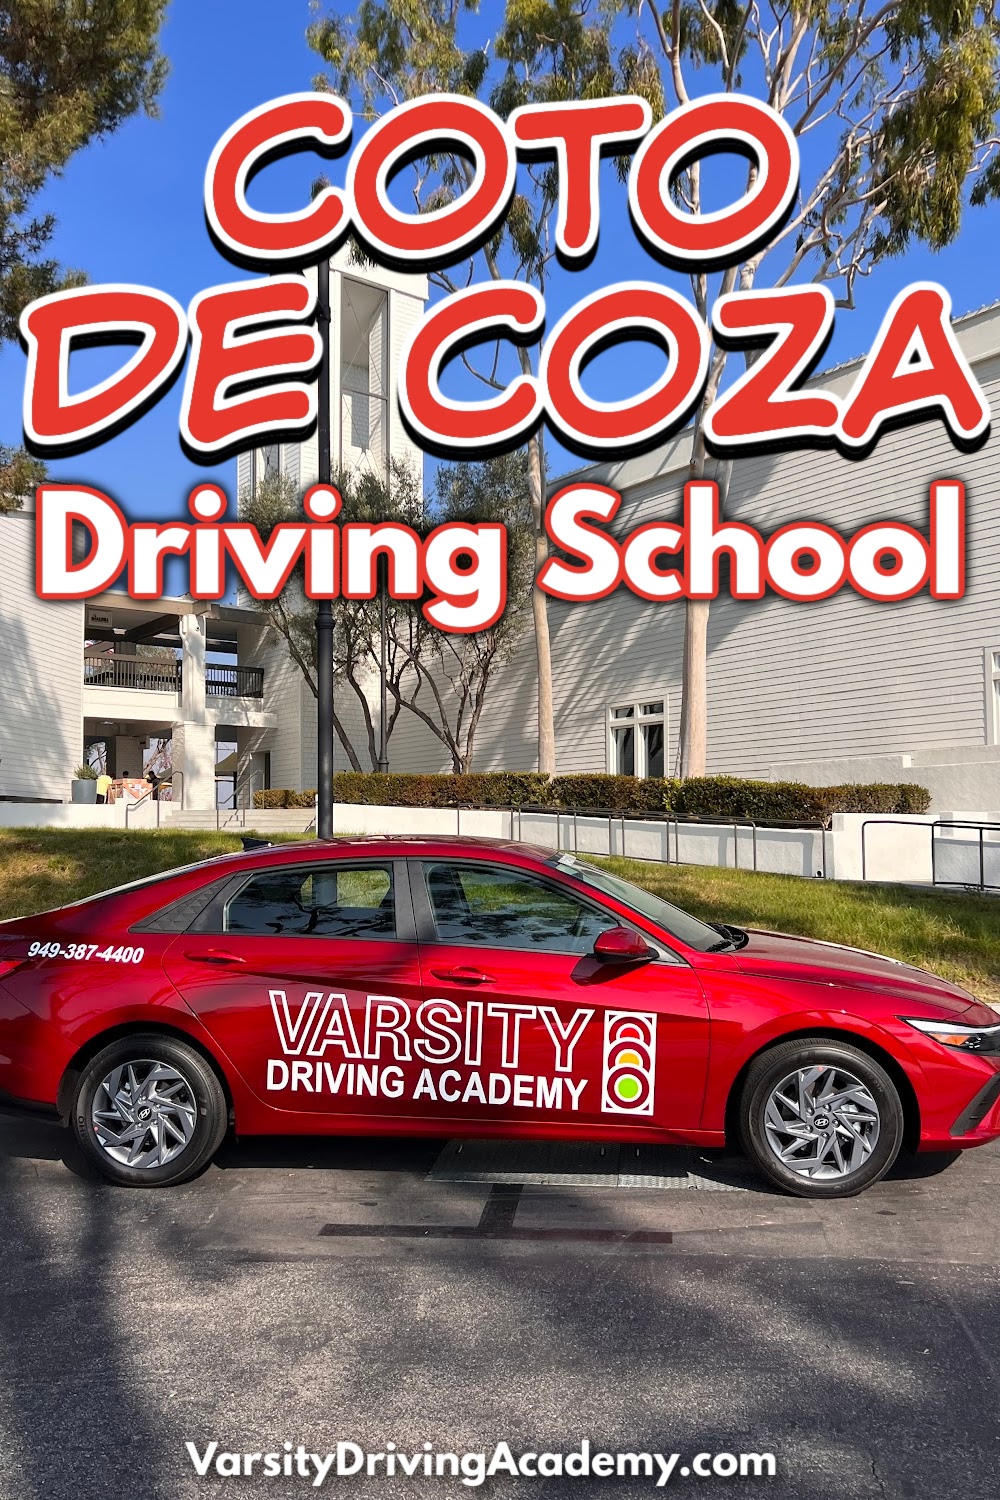 Students and adults can turn to Varsity Driving Academy for the best Coto de Coz driving school experience.